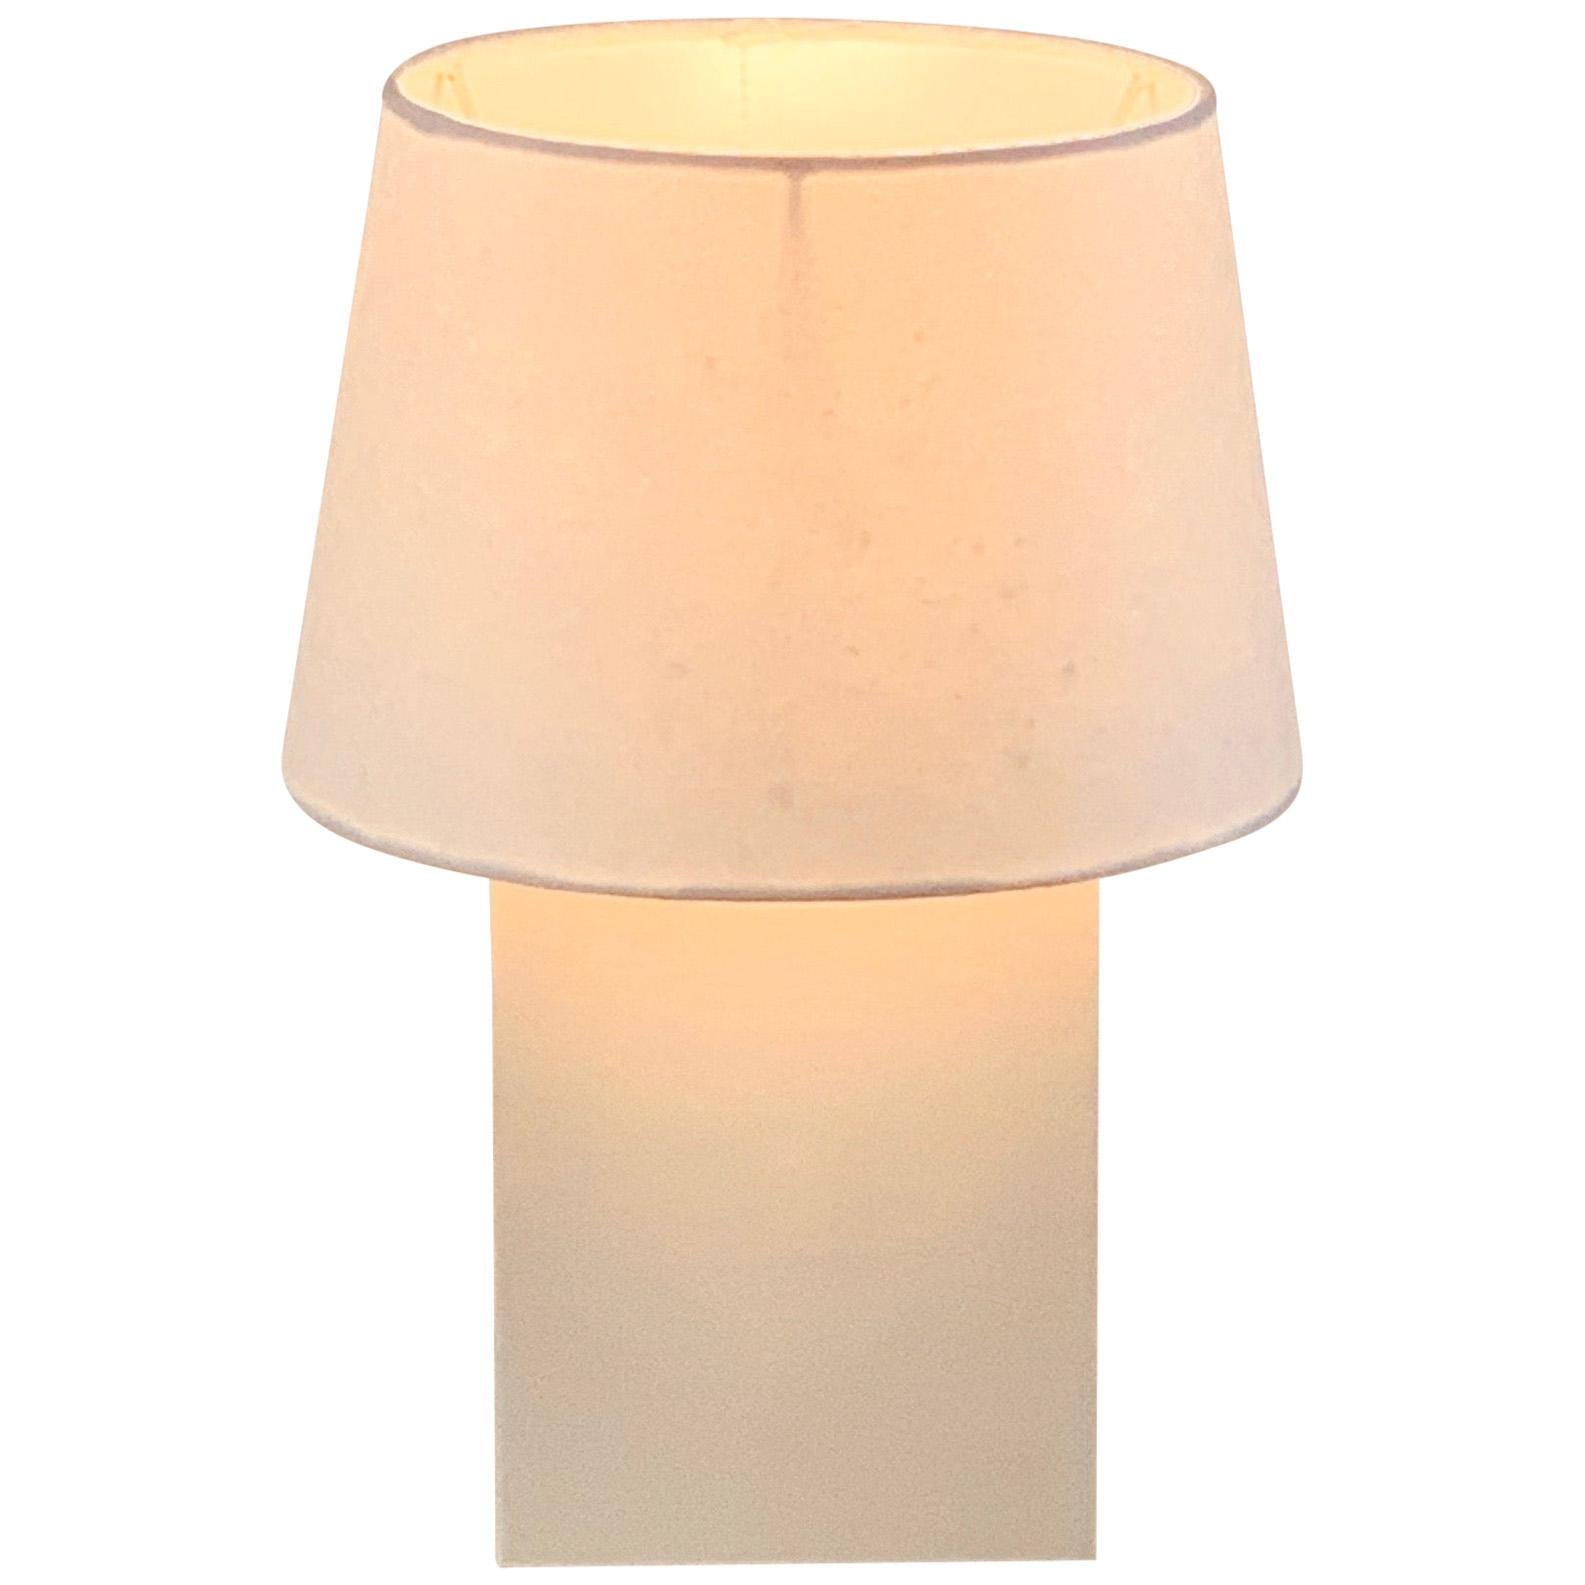 Chic 'Bloc' Parchment Lamp with Parchment Paper Shade by Design Frères For Sale